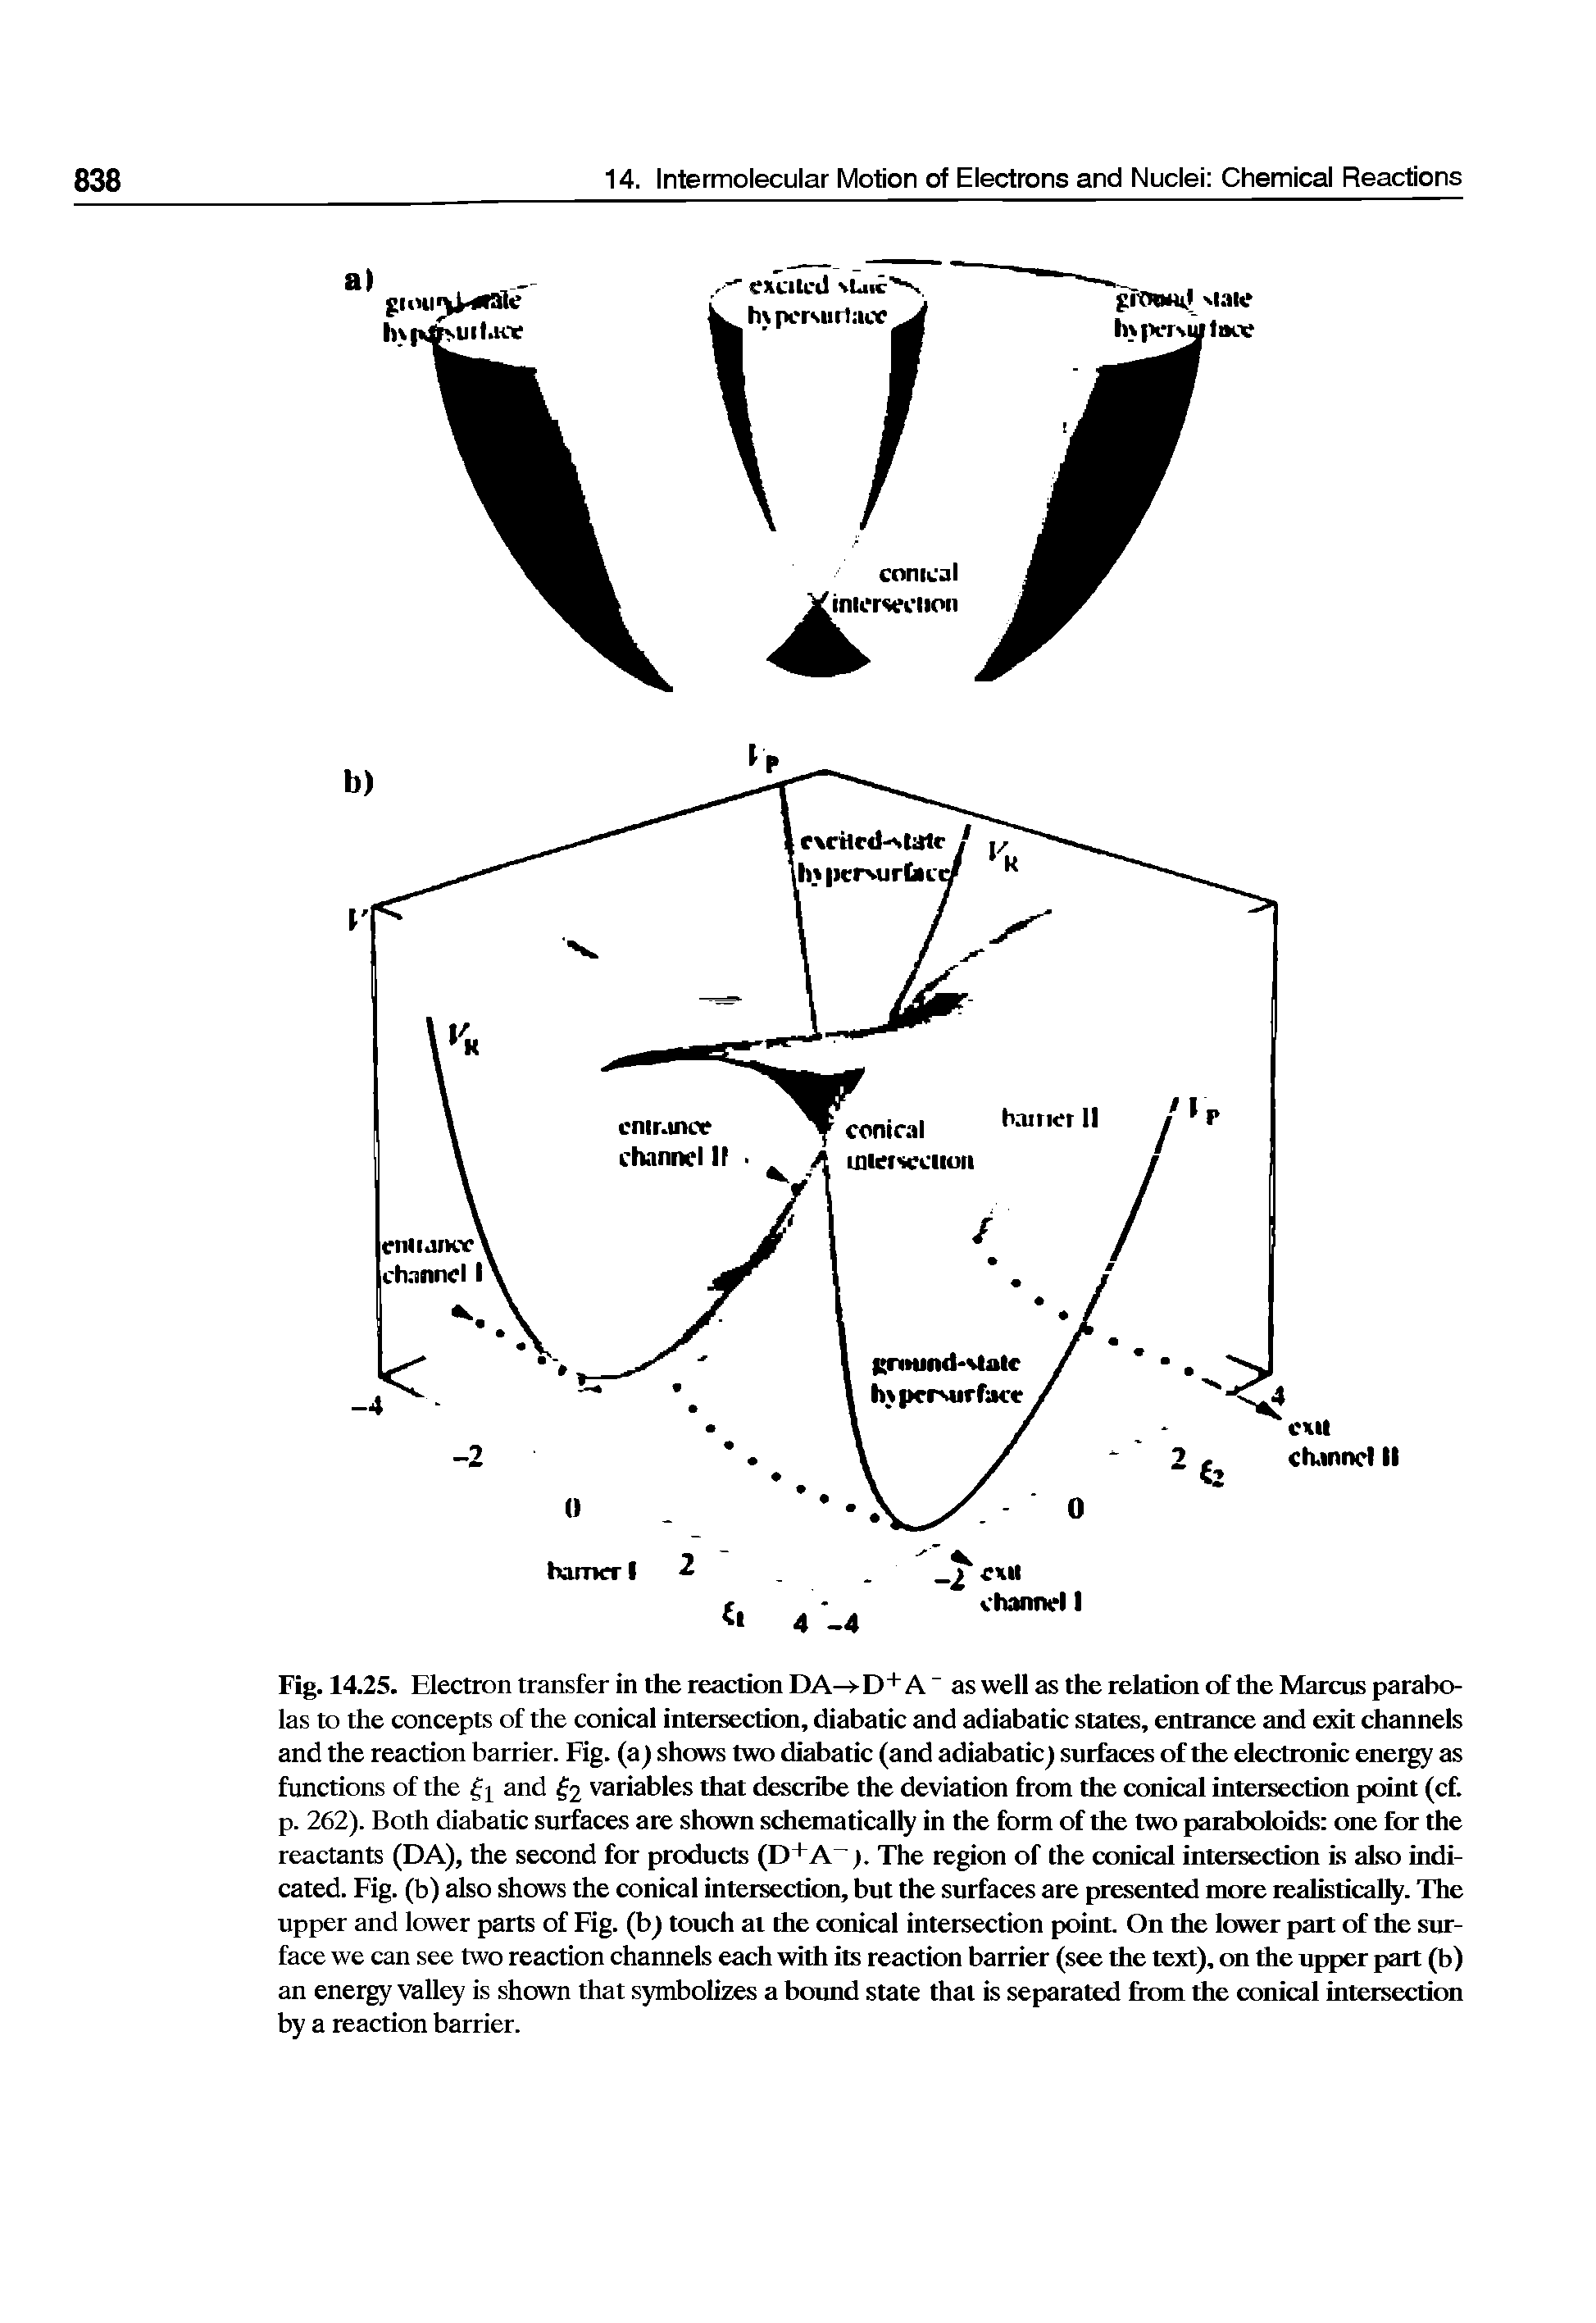 Fig. 14.25. Electron transfer in the reaction DA- -D+A " as well as the relation of the Marcus parabolas to the concepts of the conical intersection, diabatic and adiabatic states, entrance and exit channels and the reaction barrier. Fig. (a) shows two diabatic (and adiabatic) surfaces of the electronic energy as functions of the f and 2 variables that describe the deviation from the conical intersection point (cf. p. 262). Both diabatic surfaces are shown schematically in the form of the two paraboloids one for the reactants (DA), the second for products (D+A ). The region of the conical intersection is also indicated. Fig. (b) also shows the conical intersection, but the surfaces are presented more realistically. The upper and lower parts of Fig. (b) touch at the conical intersection point. On the lower part of the surface we can see two reaction channels each with its reaction barrier (see the text), on the upper part (b) an energy valley is shown that symbolizes a bound state that is separated from the conical intersection by a reaction barrier.